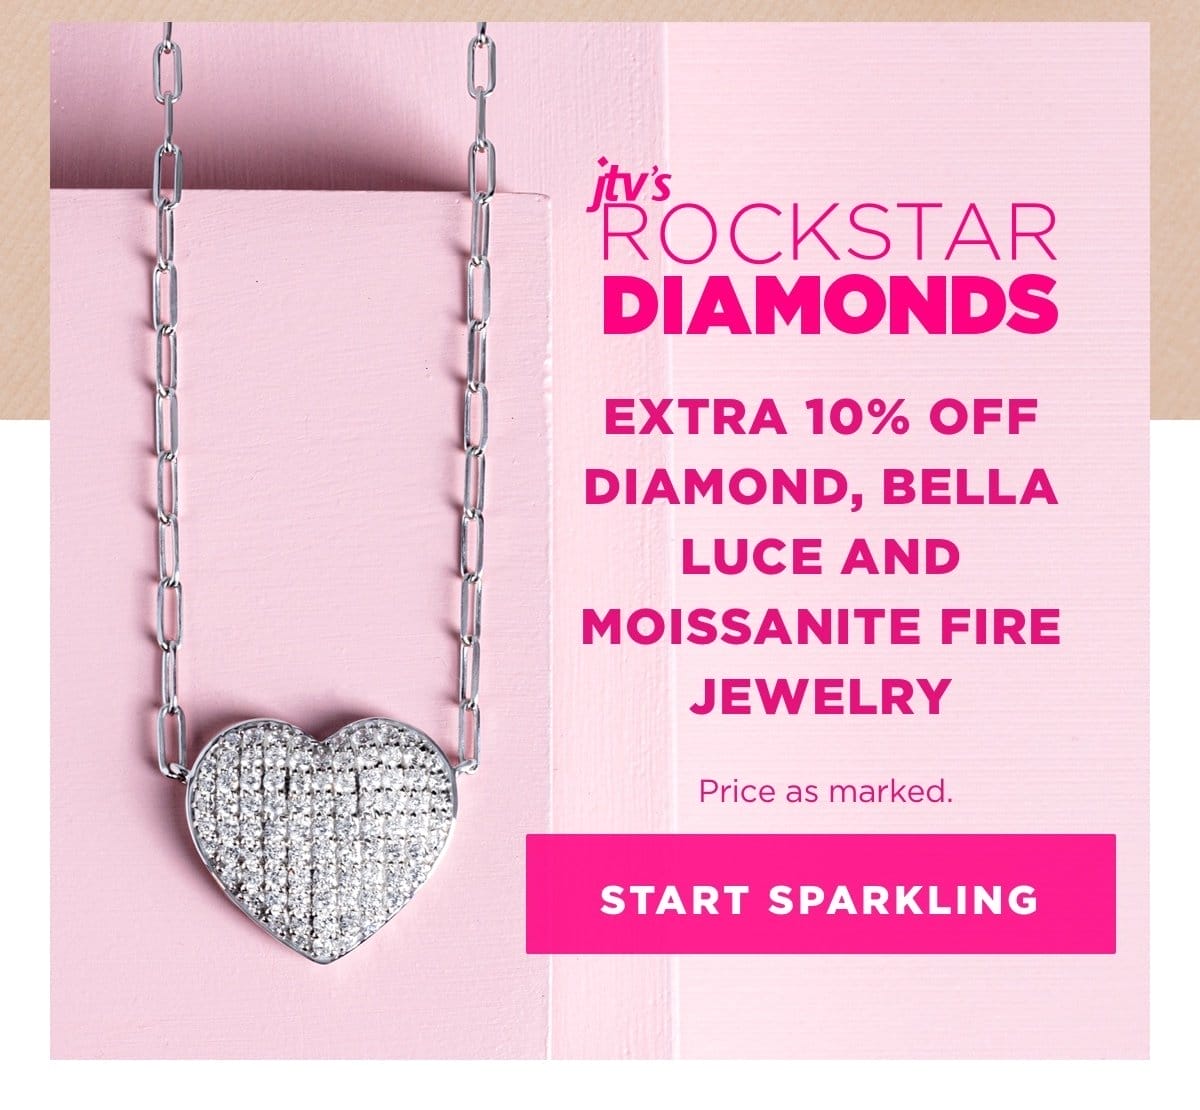 EXTRA 10% OFF DIAMOND, BELLA LUCE AND MOISSANITE FIRE JEWELRY Price as marked. 